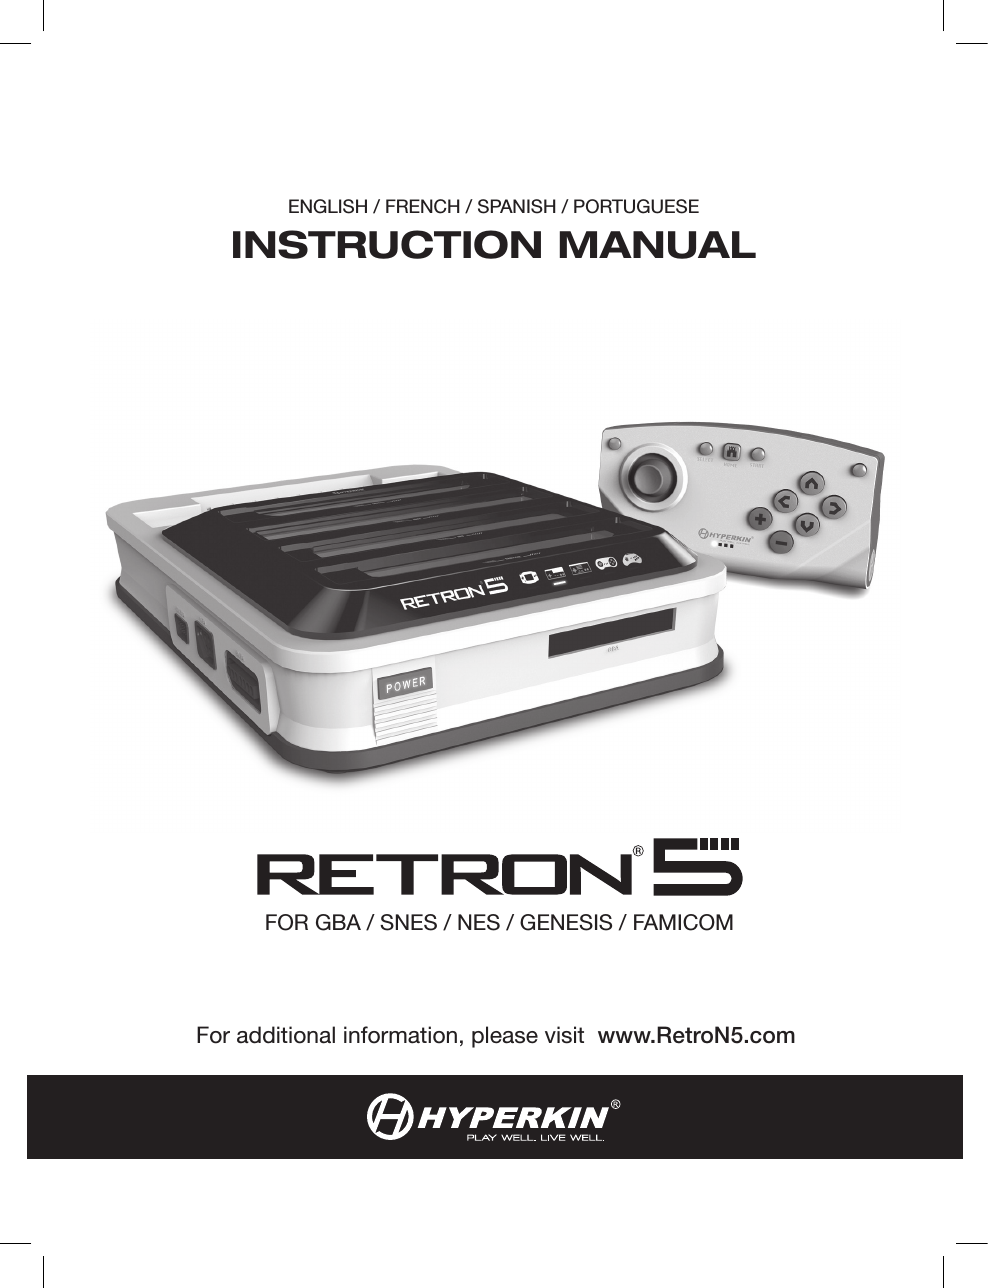 ENGLISH / FRENCH / SPANISH / PORTUGUESEINSTRUCTION MANUALFor additional information, please visit  www.RetroN5.comFOR GBA / SNES / NES / GENESIS / FAMICOM